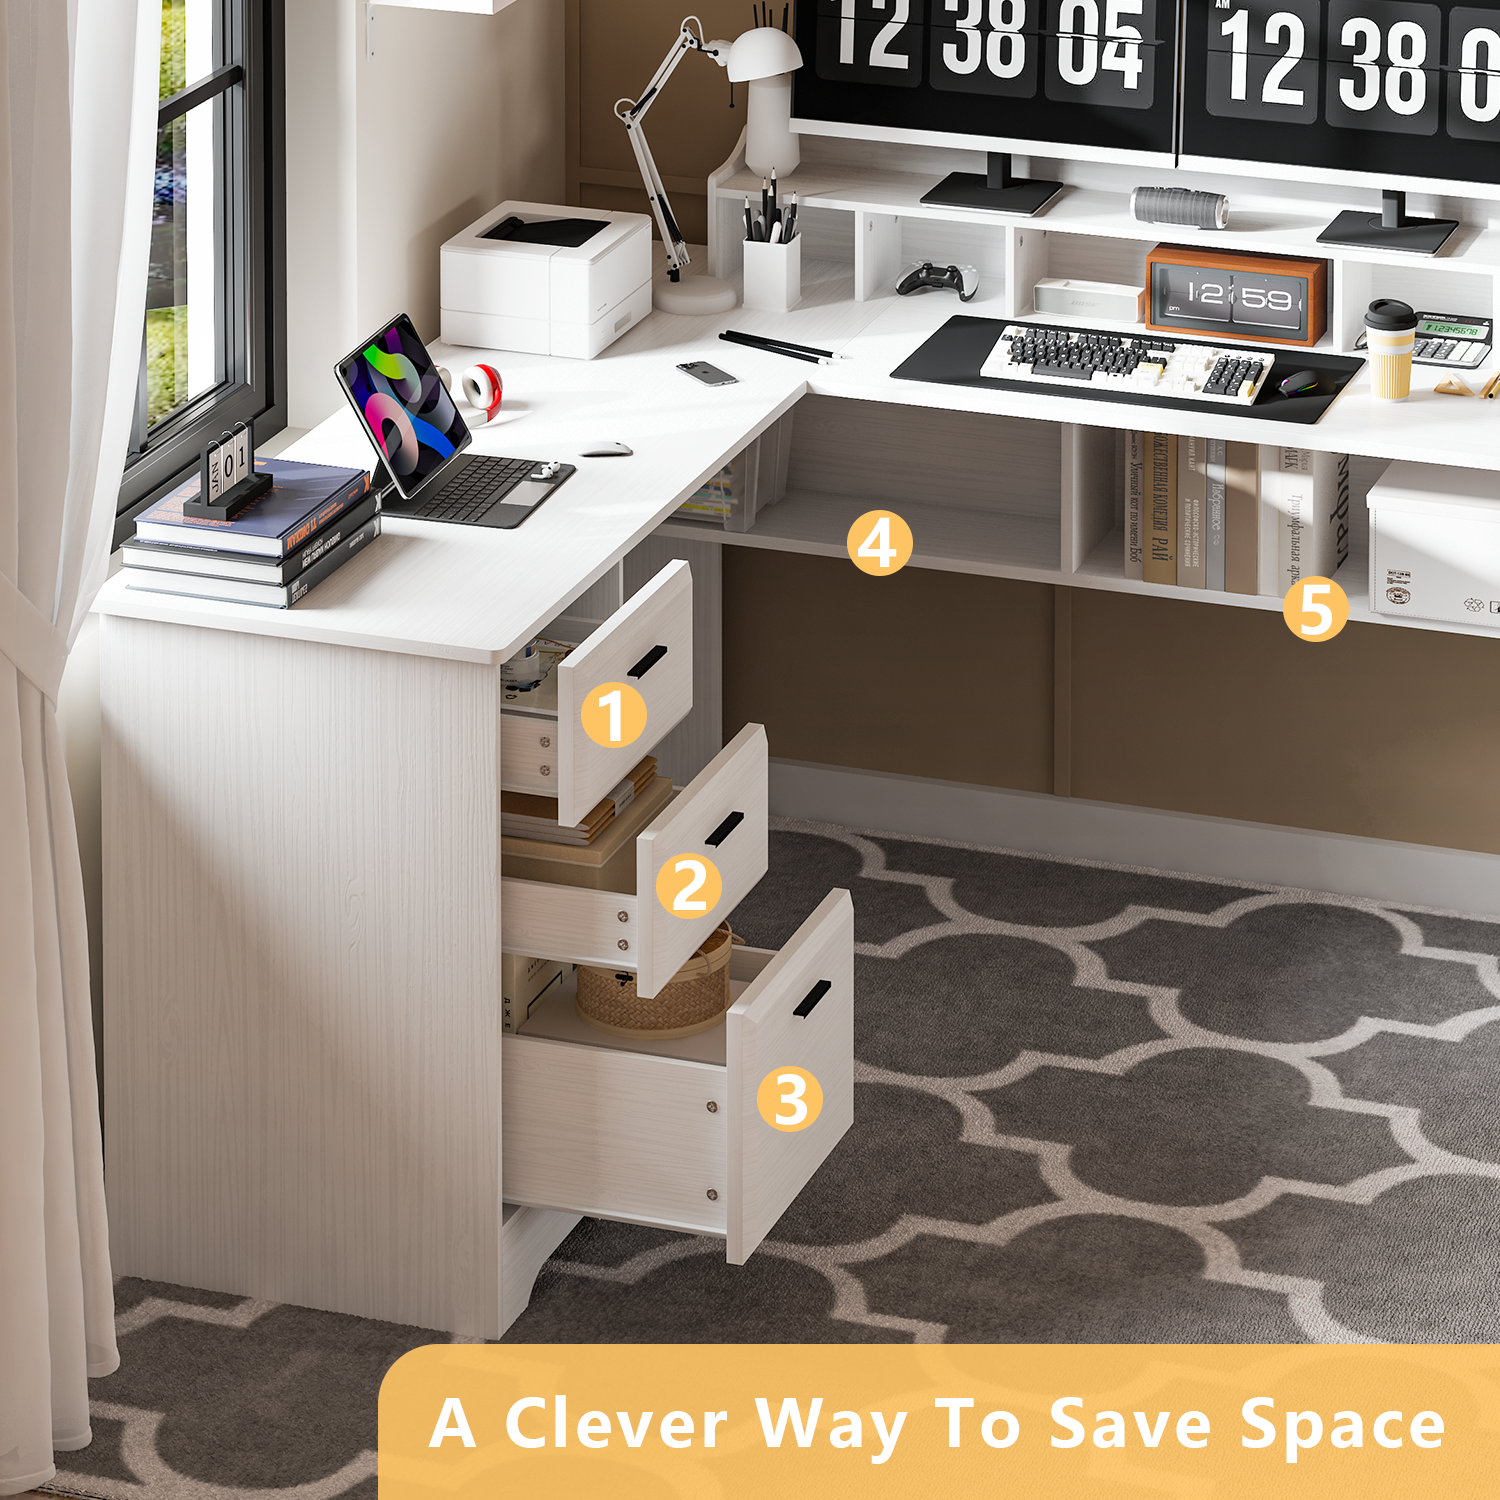 Catrimown White L Shaped Desk with Drawers, 60 Inch Corner Computer Desk with Power Outlet and USB Ports, Wooden Home Office Desk with File Cabinets, White - image 3 of 9